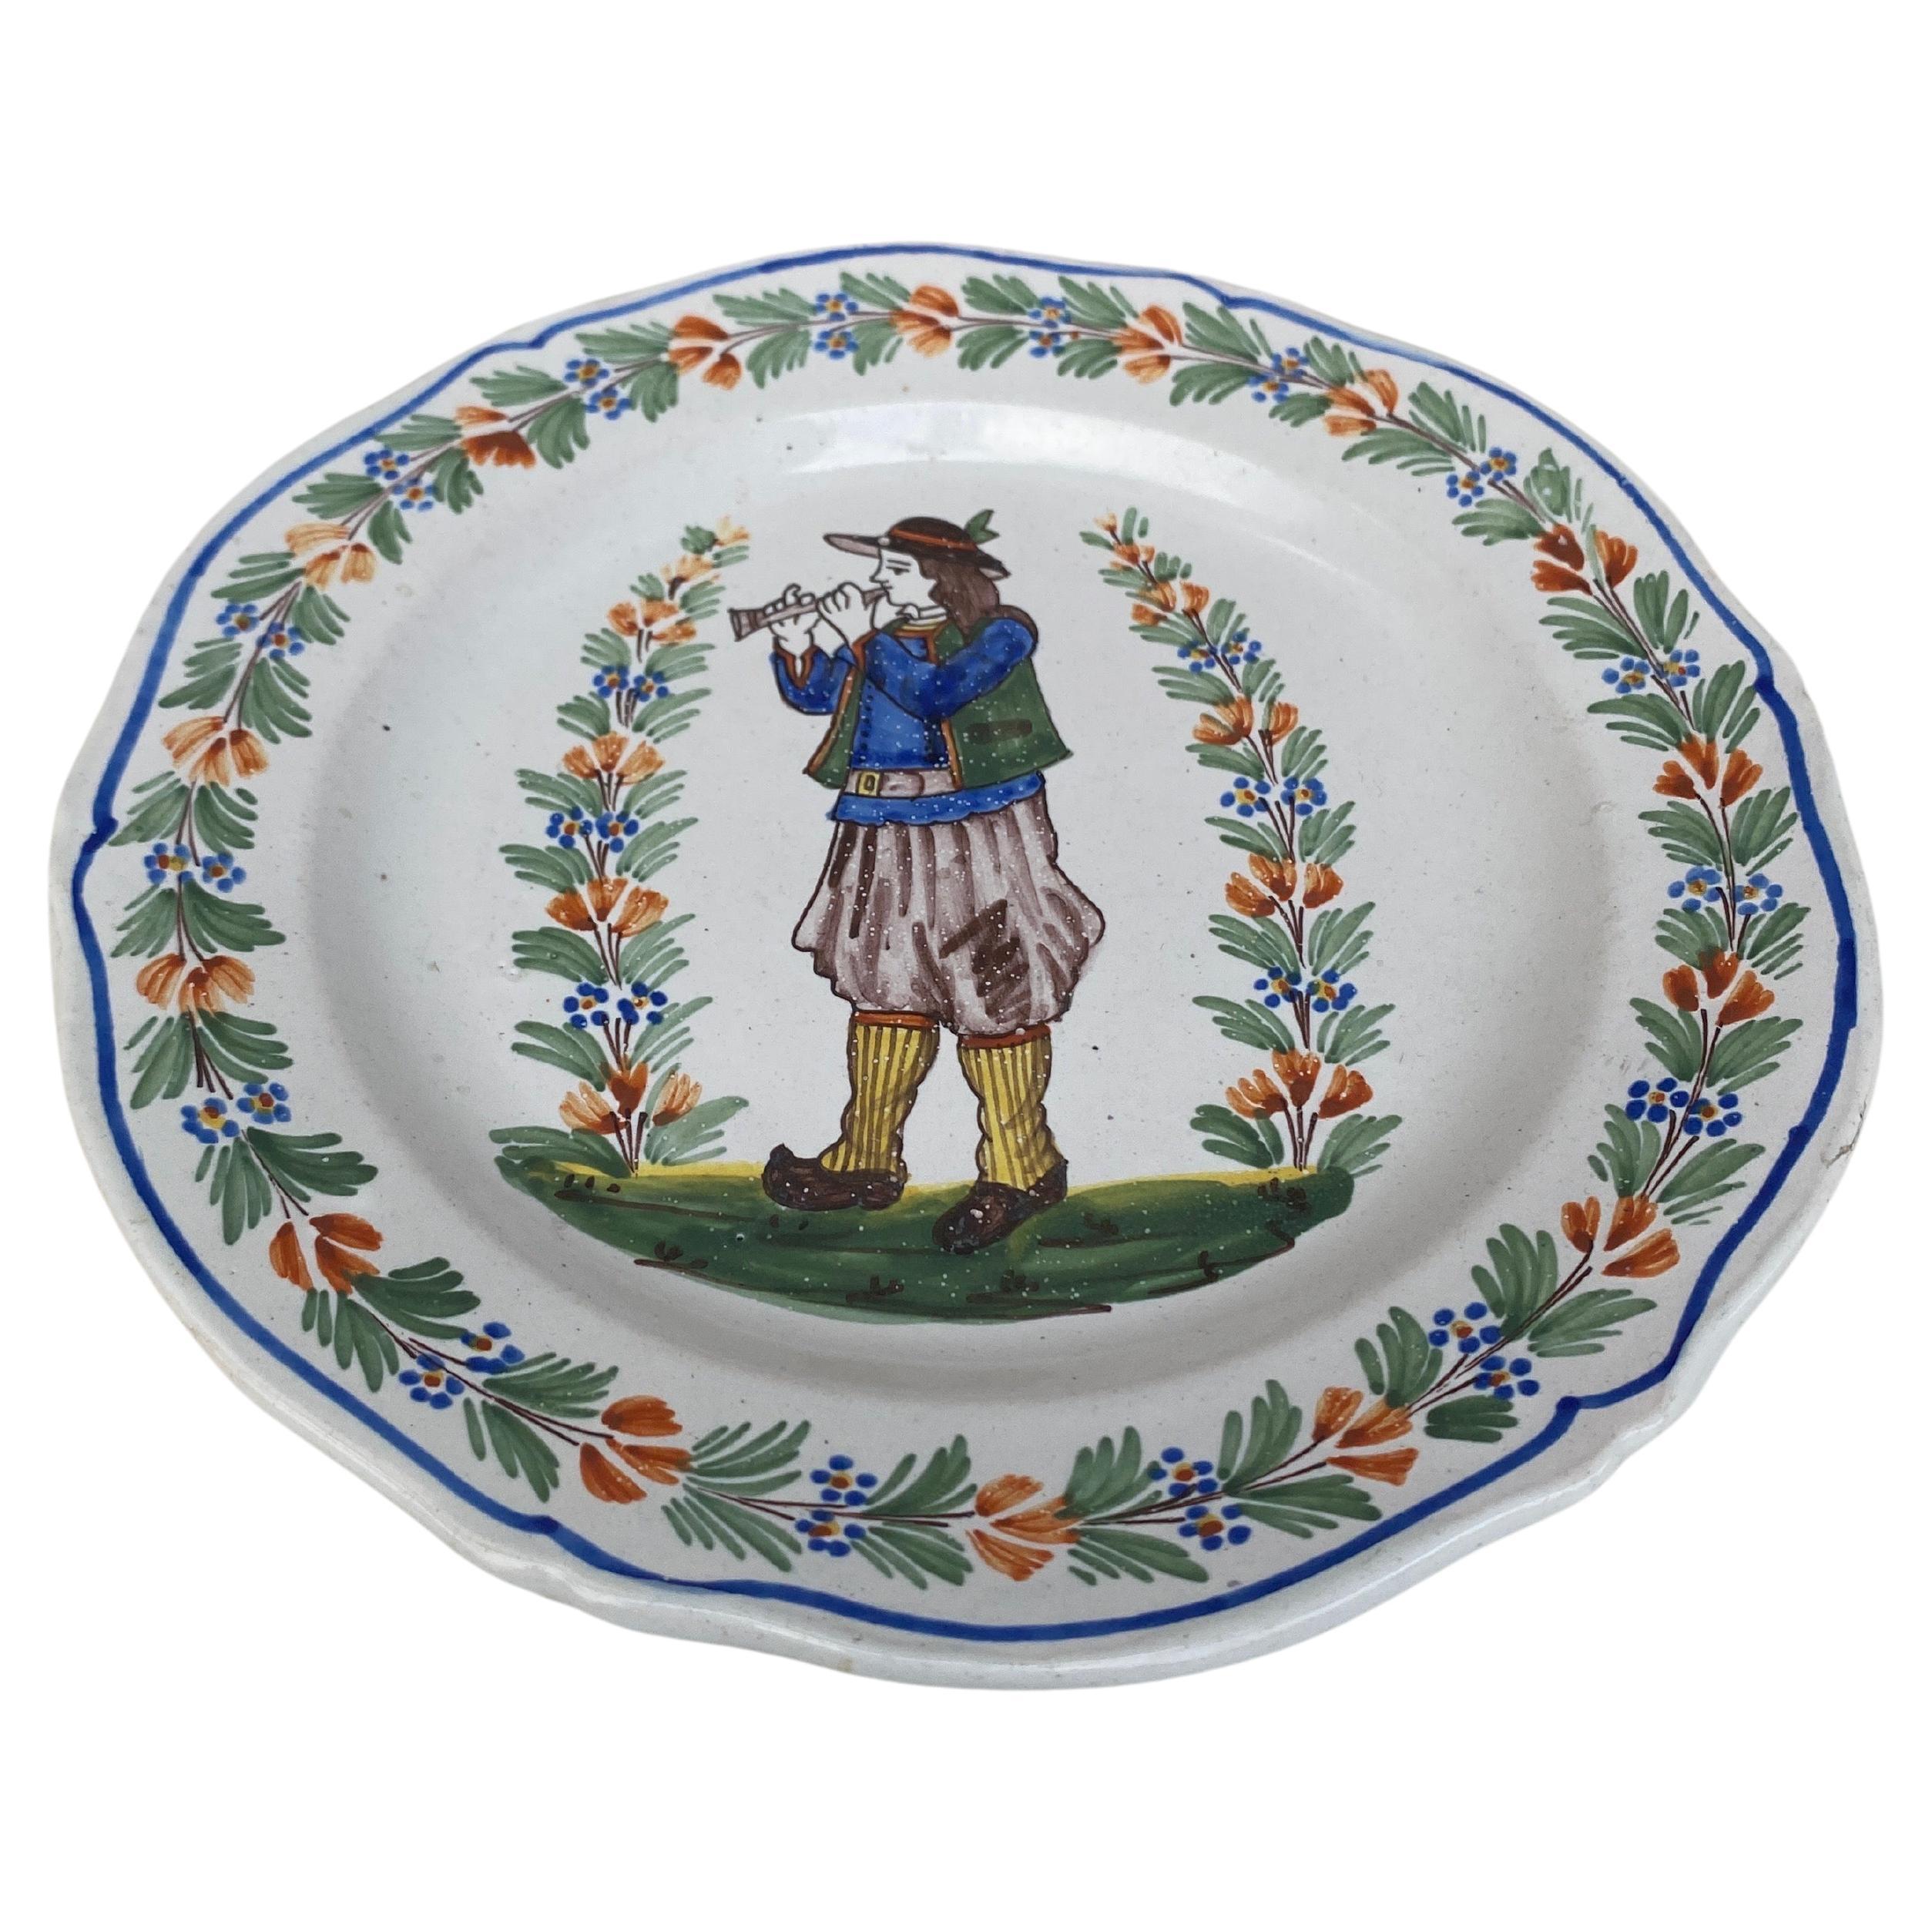 French Faience Plate Henriot Quimper Circa 1900.
Breton with a flute.
8 inches diameter.
 